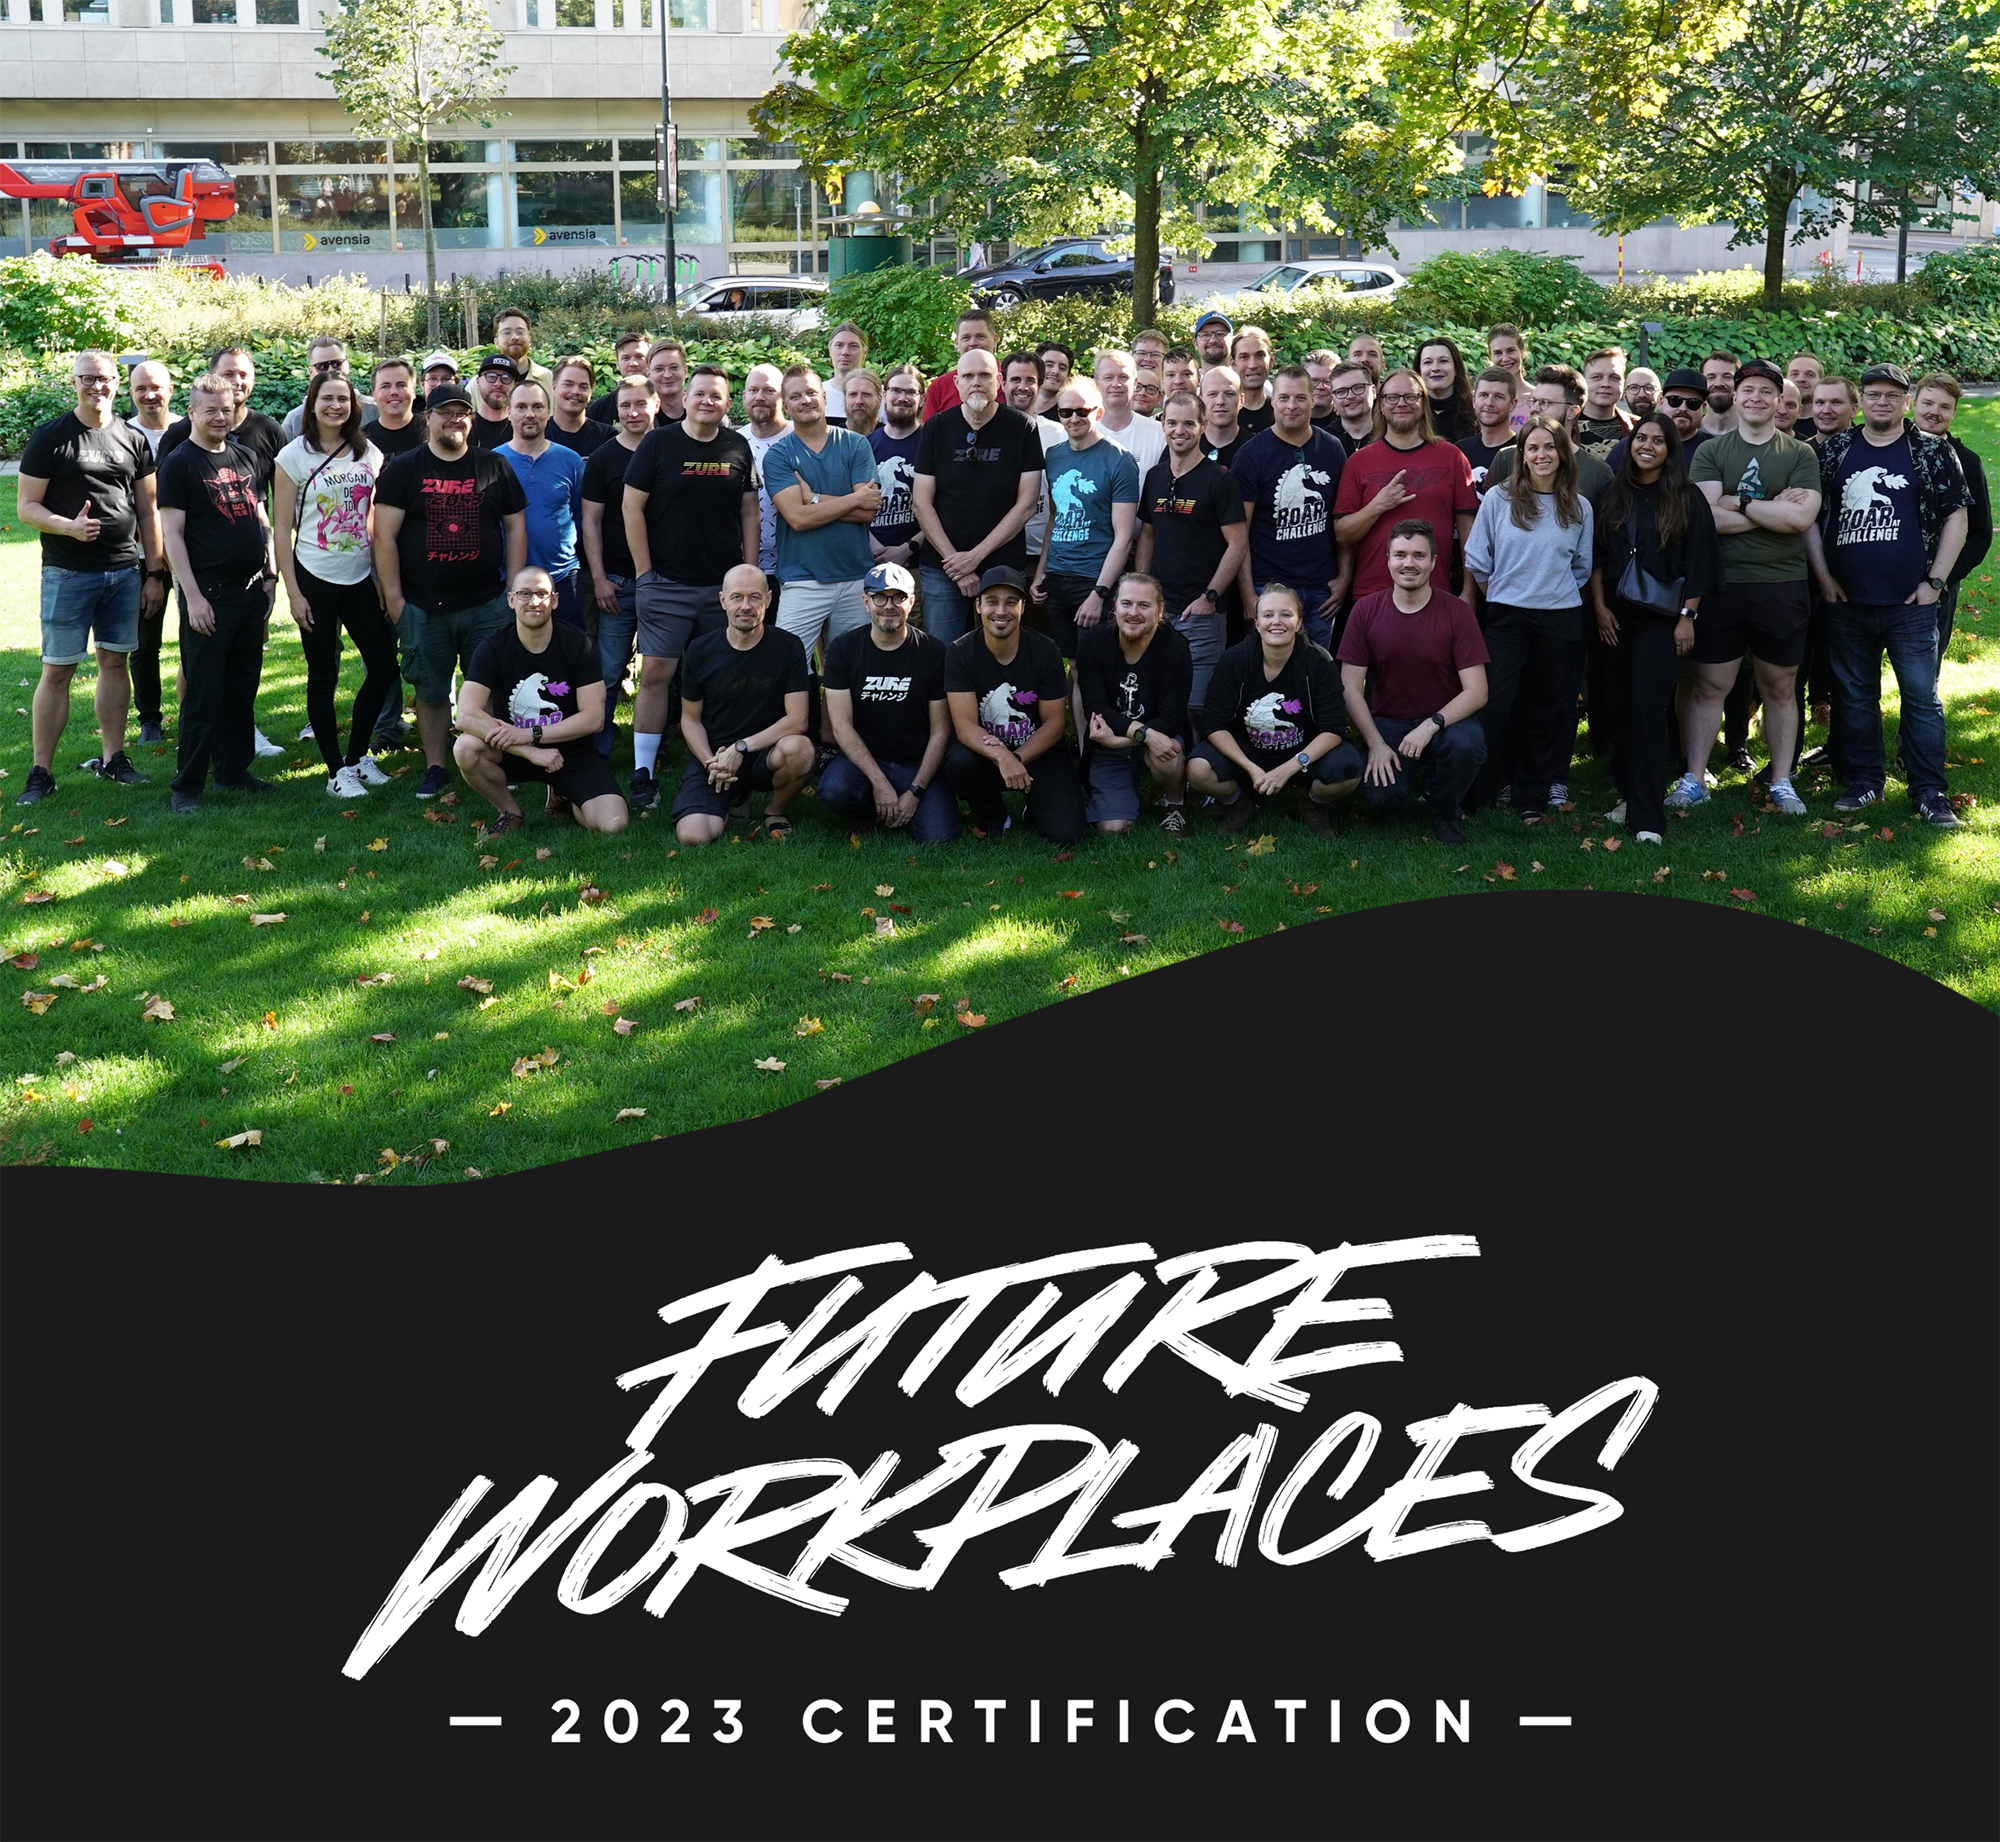 Zure is Future workplaces certified 2023